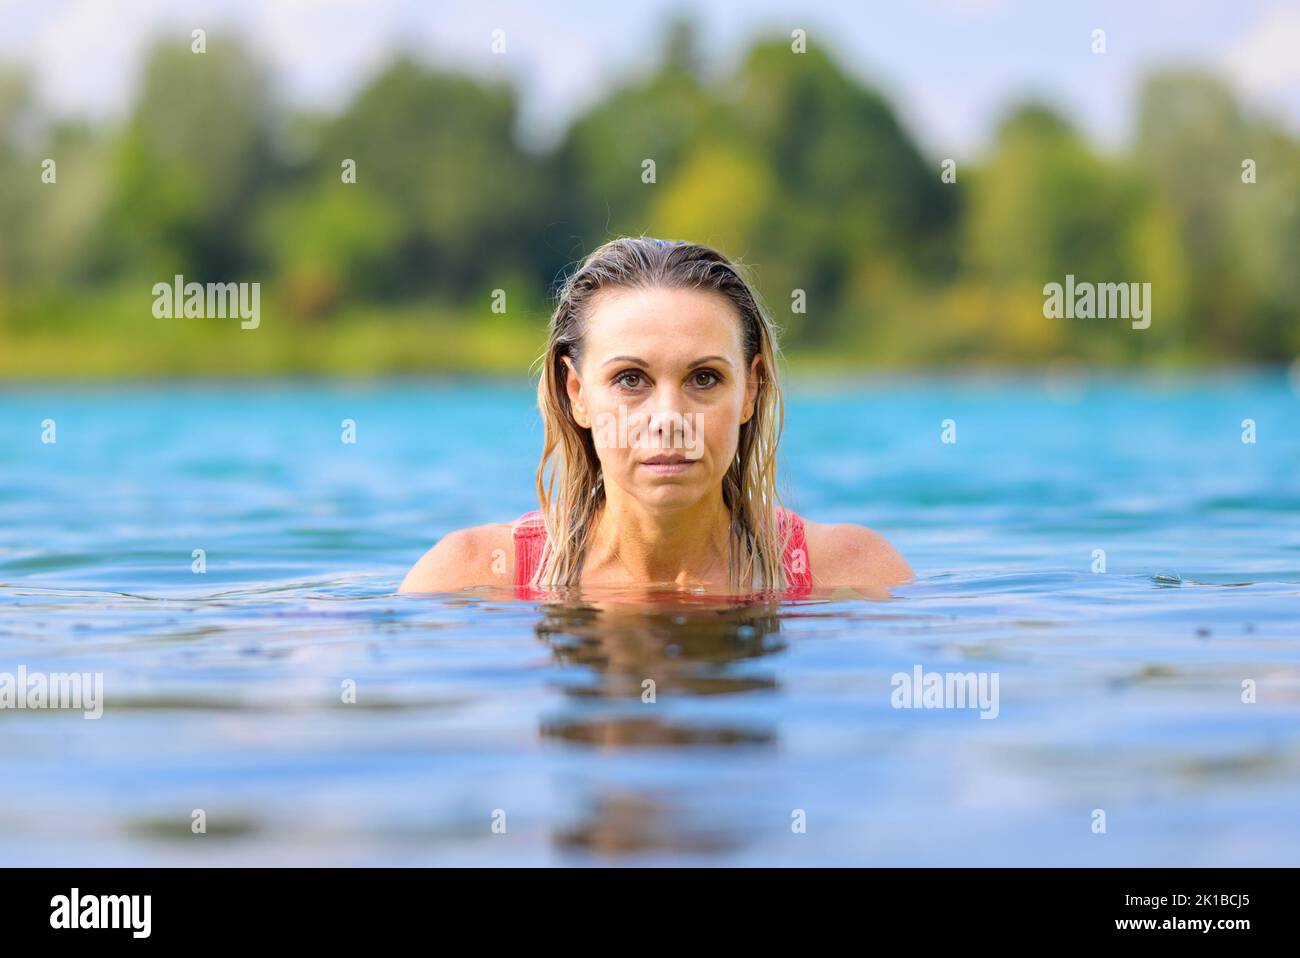 Gorgeous attractive blond woman with wet hair in a red swimsuit slowly rising out of the water with a stern look Stock Photo